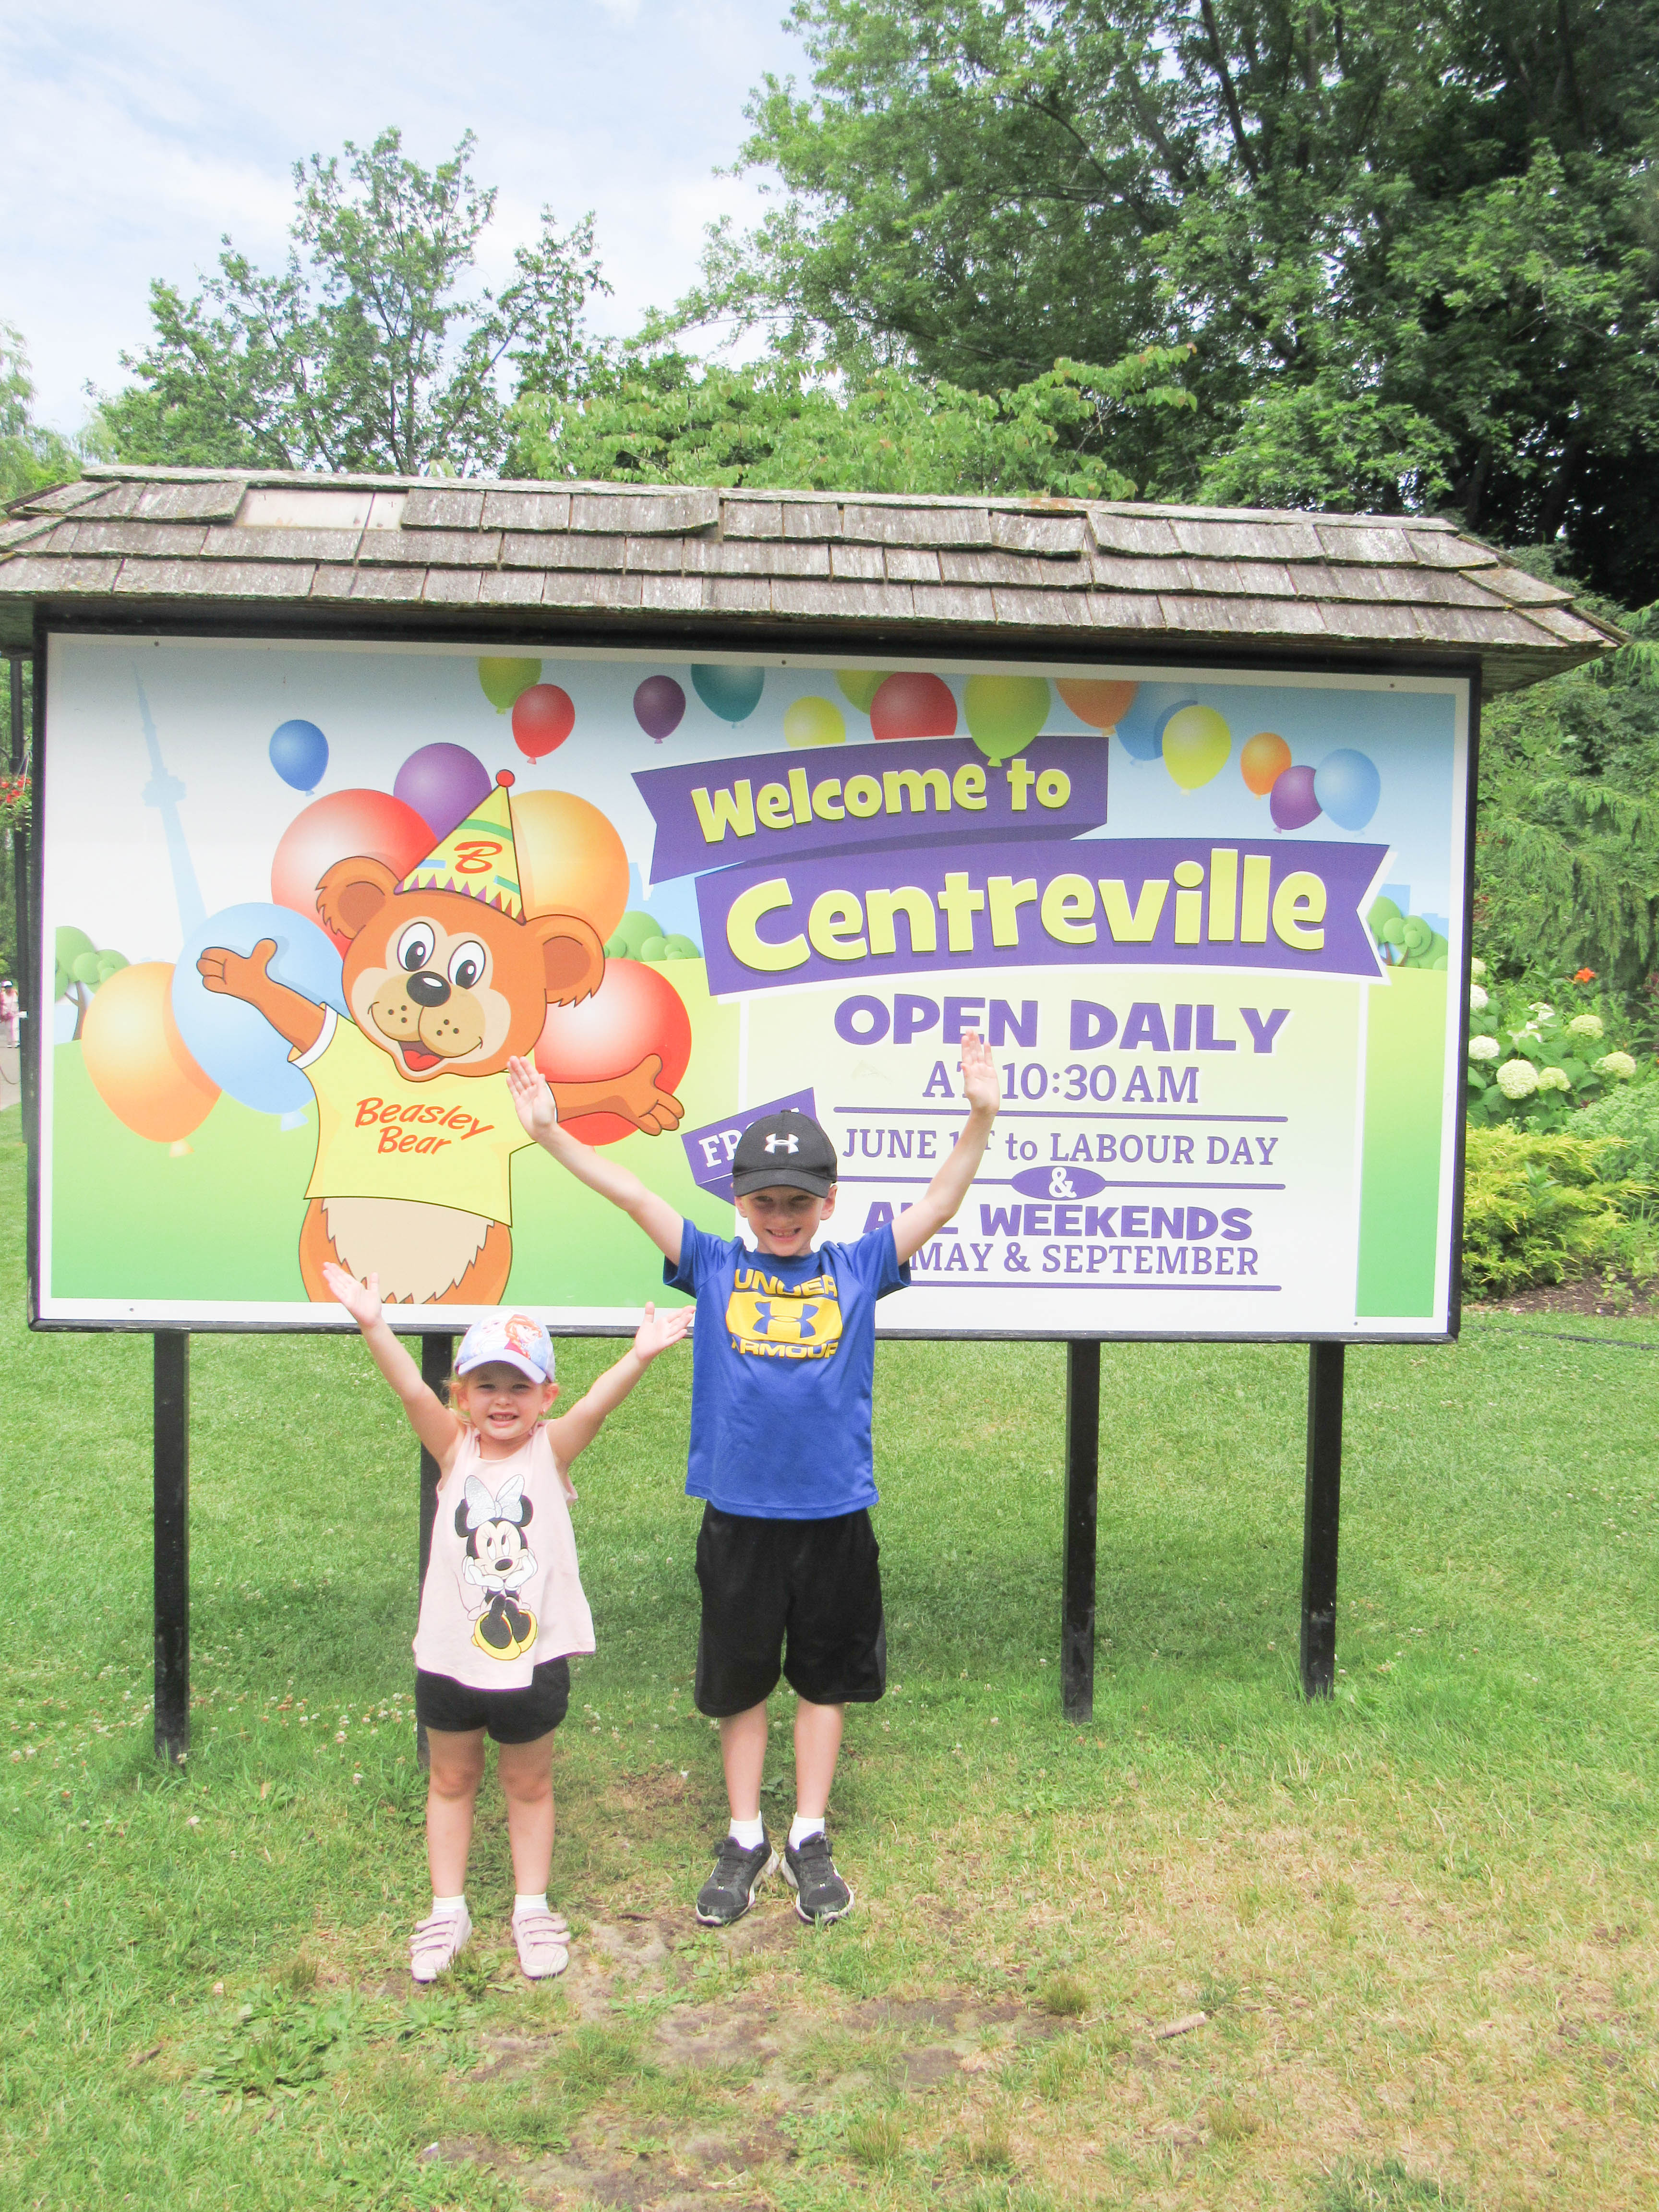 Review on Centreville in Toronto on Livin' Life with Style